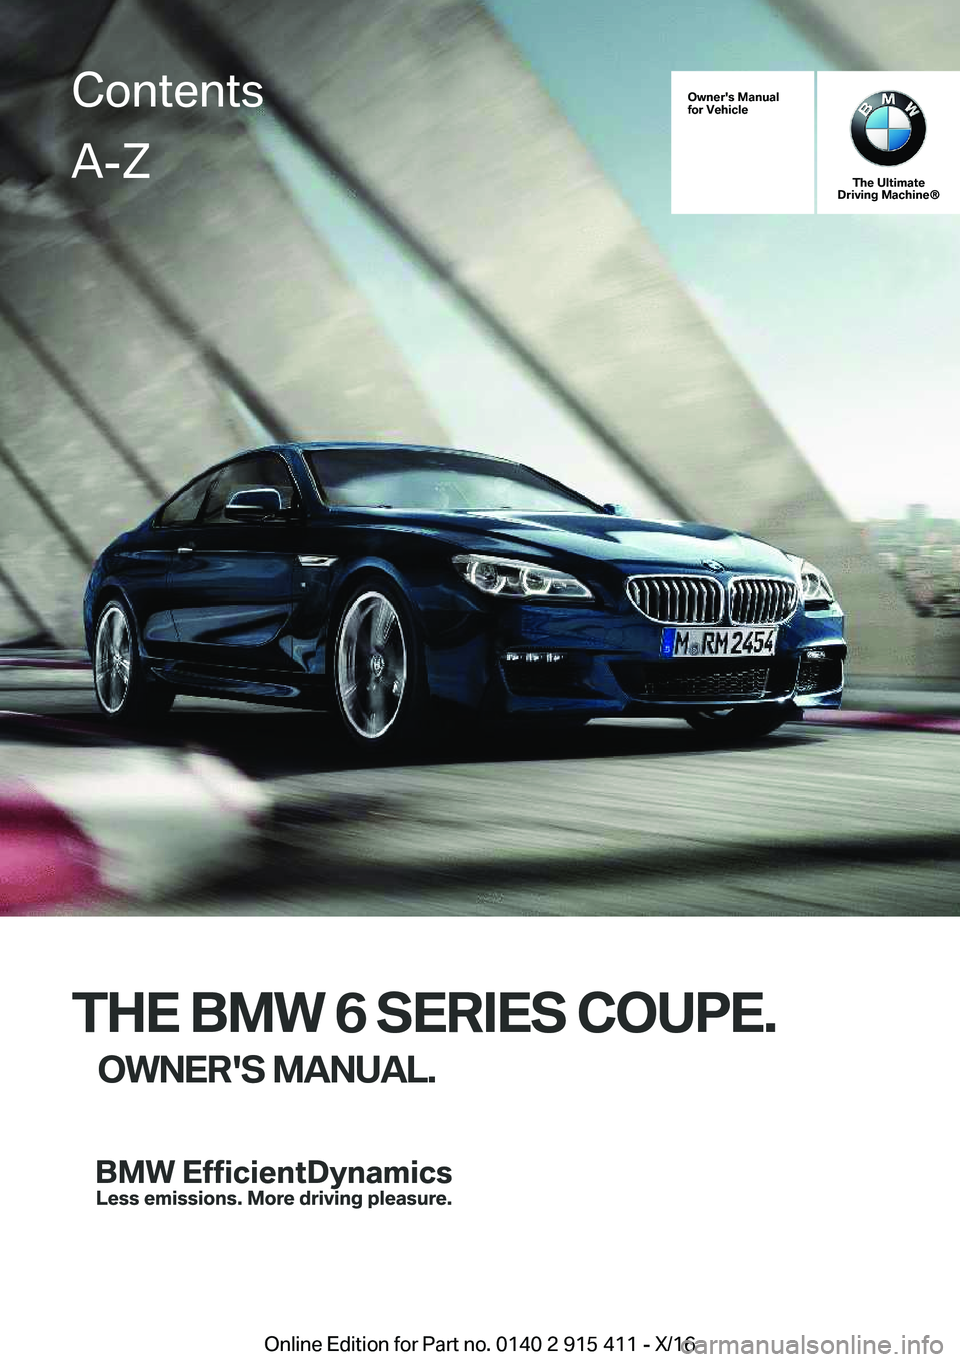 BMW 6 SERIES COUPE 2017  Owners Manual �O�w�n�e�r�'�s��M�a�n�u�a�l
�f�o�r��V�e�h�i�c�l�e
�T�h�e��U�l�t�i�m�a�t�e
�D�r�i�v�i�n�g��M�a�c�h�i�n�e�n
�T�H�E��B�M�W��6��S�E�R�I�E�S��C�O�U�P�E�.
�O�W�N�E�R�'�S��M�A�N�U�A�L�.
�C�o